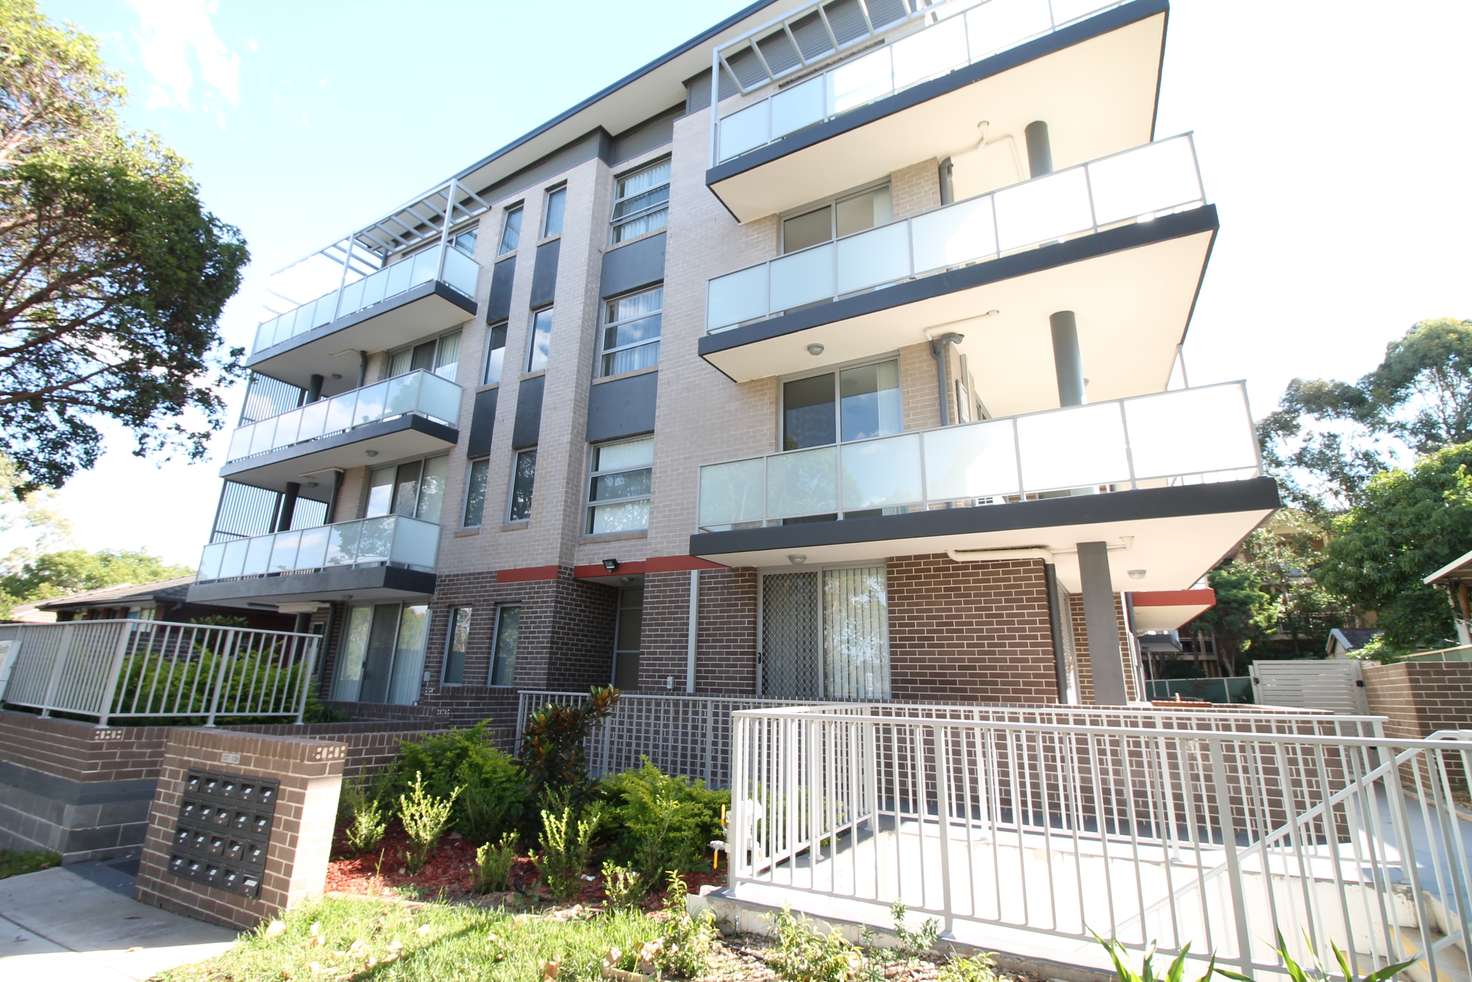 Main view of Homely apartment listing, 15/135-137 Pitt St, Merrylands NSW 2160